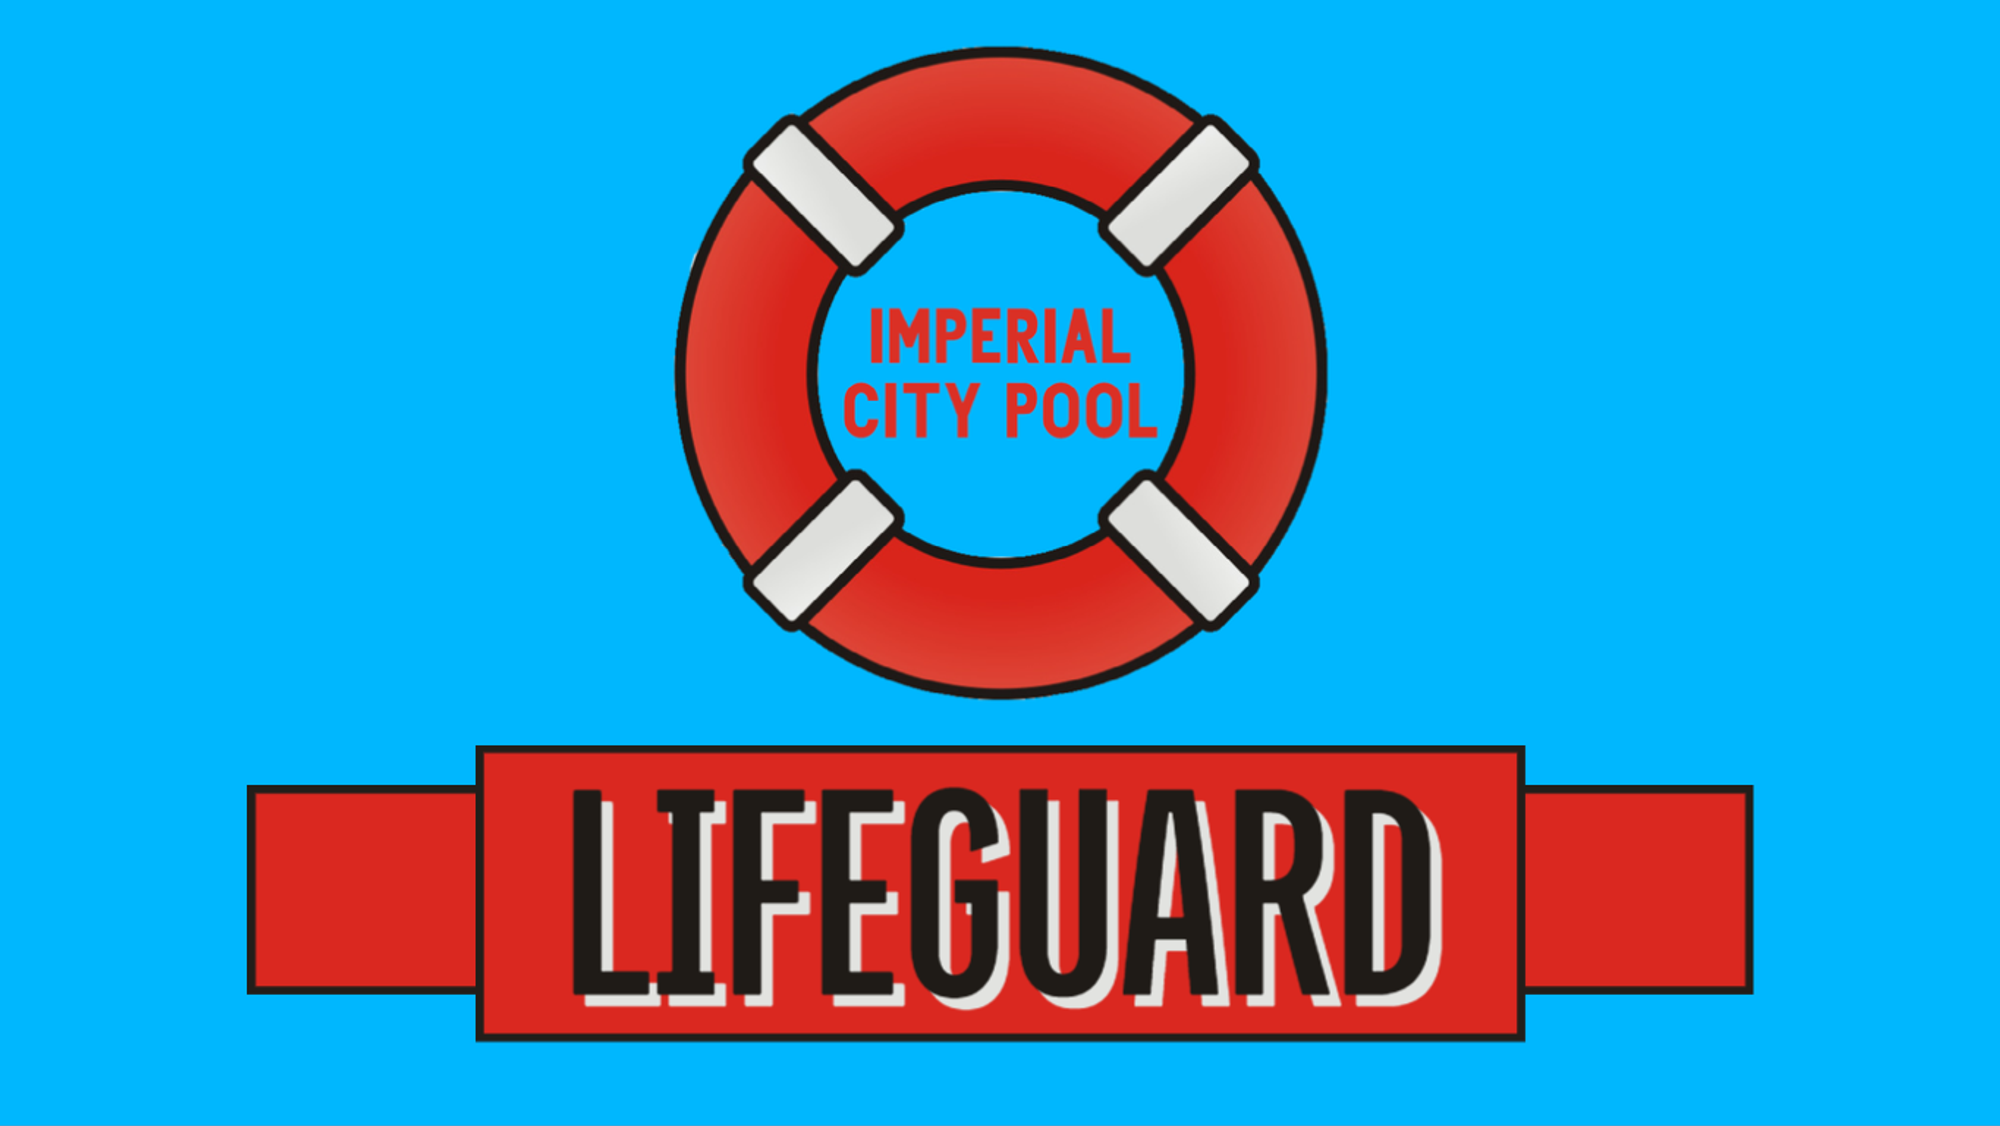 Lifeguard - Imperial Pool